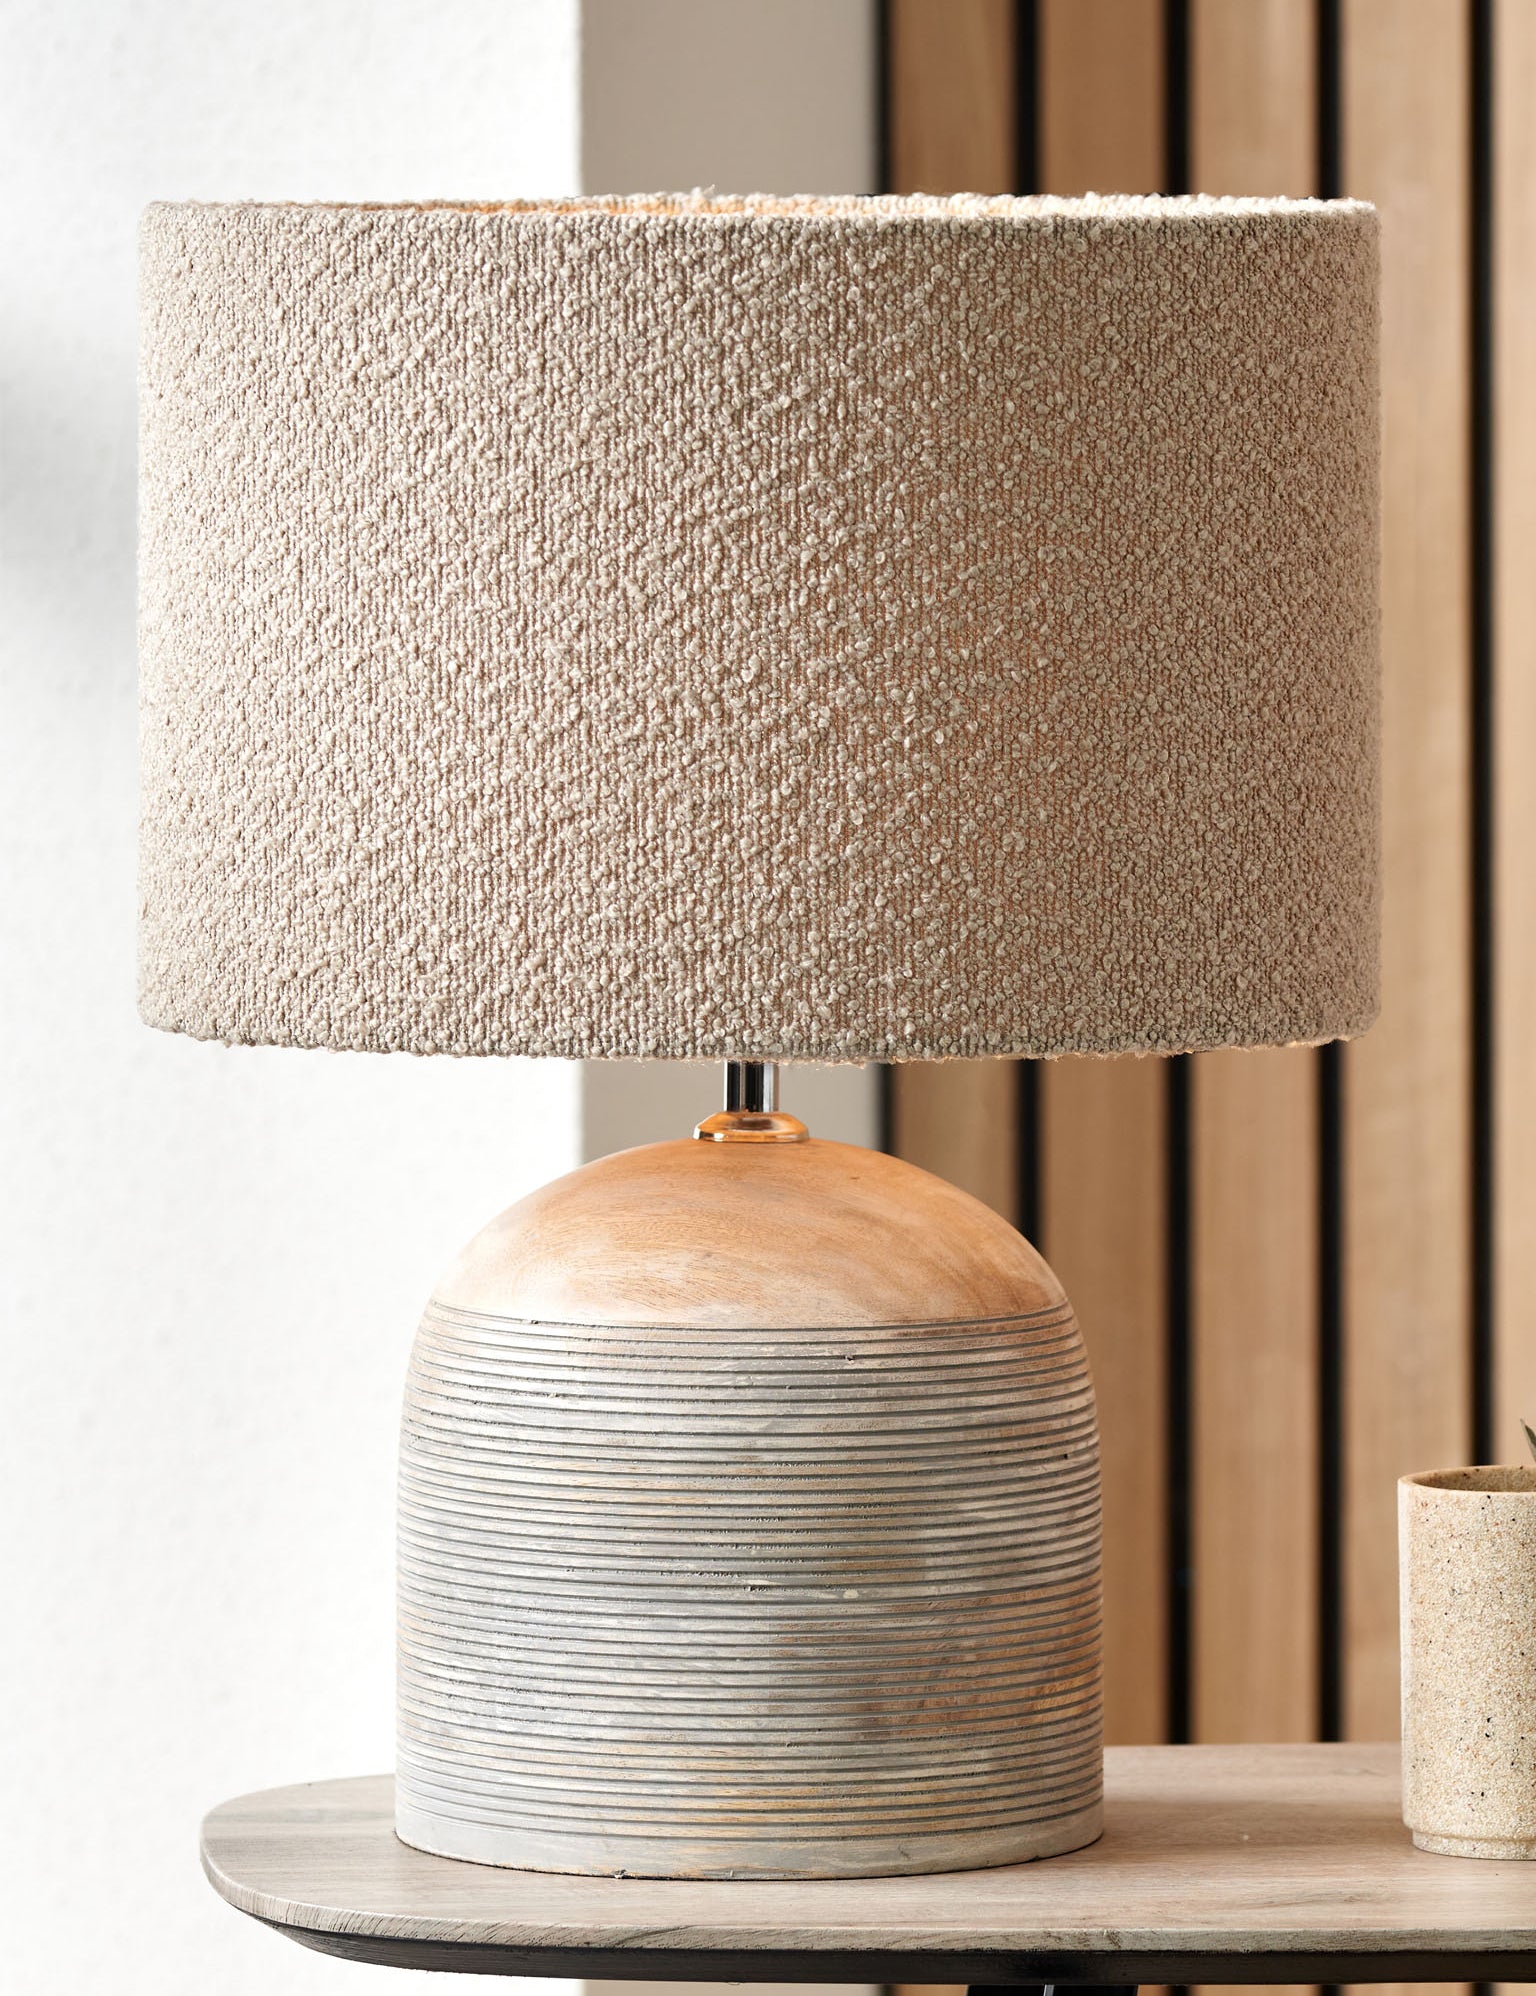 Jannu Wooden Grooved Table Lamp